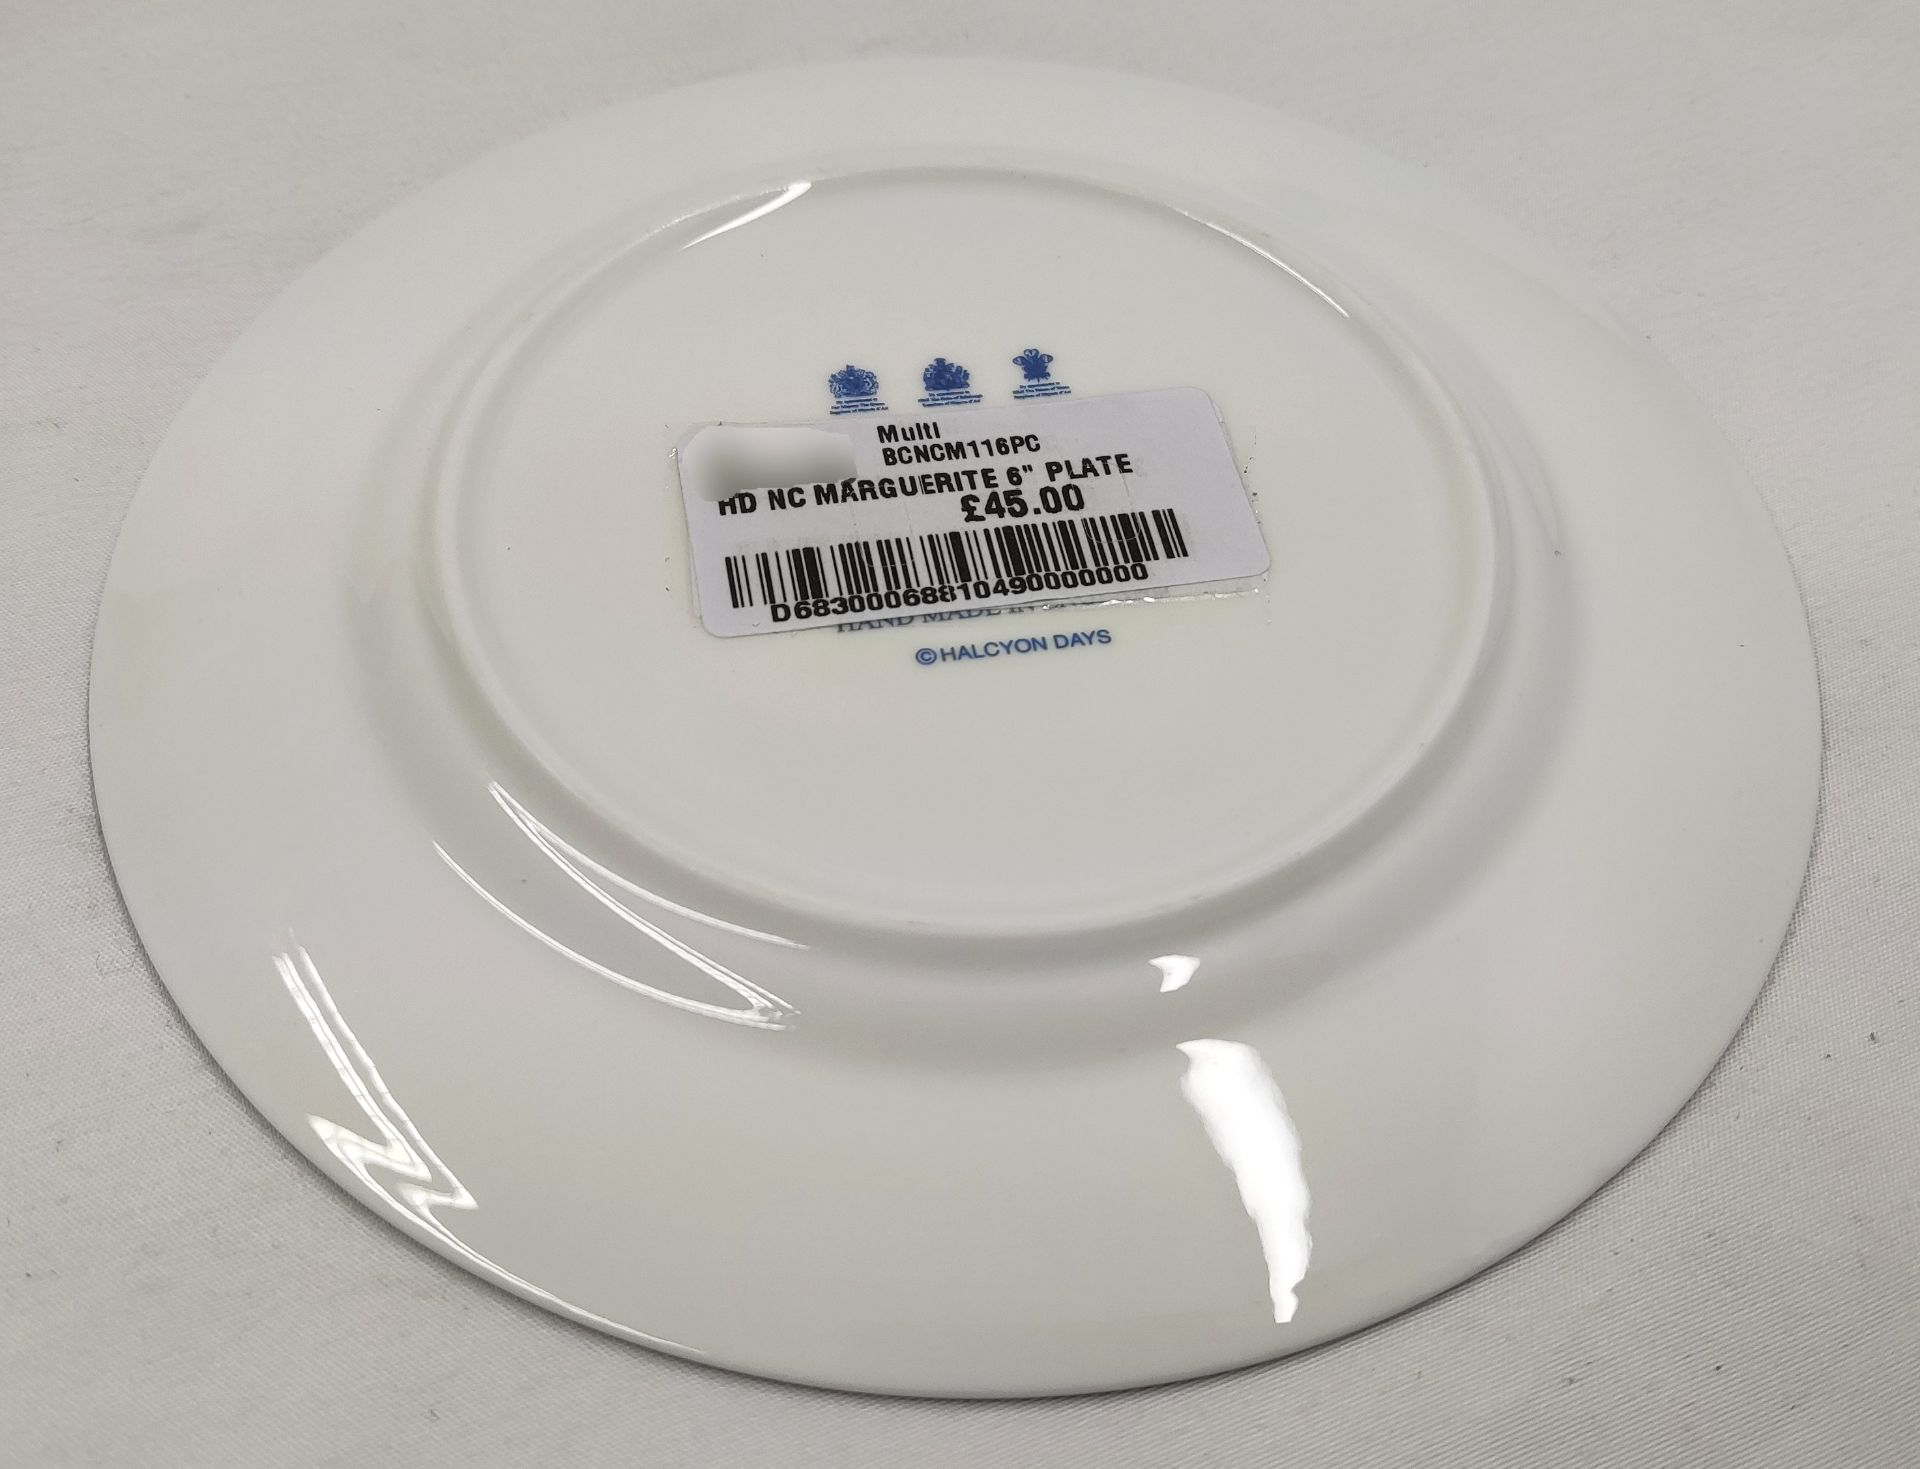 1 x HALCYON DAYS Nina Campbell Marguerite 6" Side Plate - New/Boxed - Original RRP £59.00 - Image 6 of 10